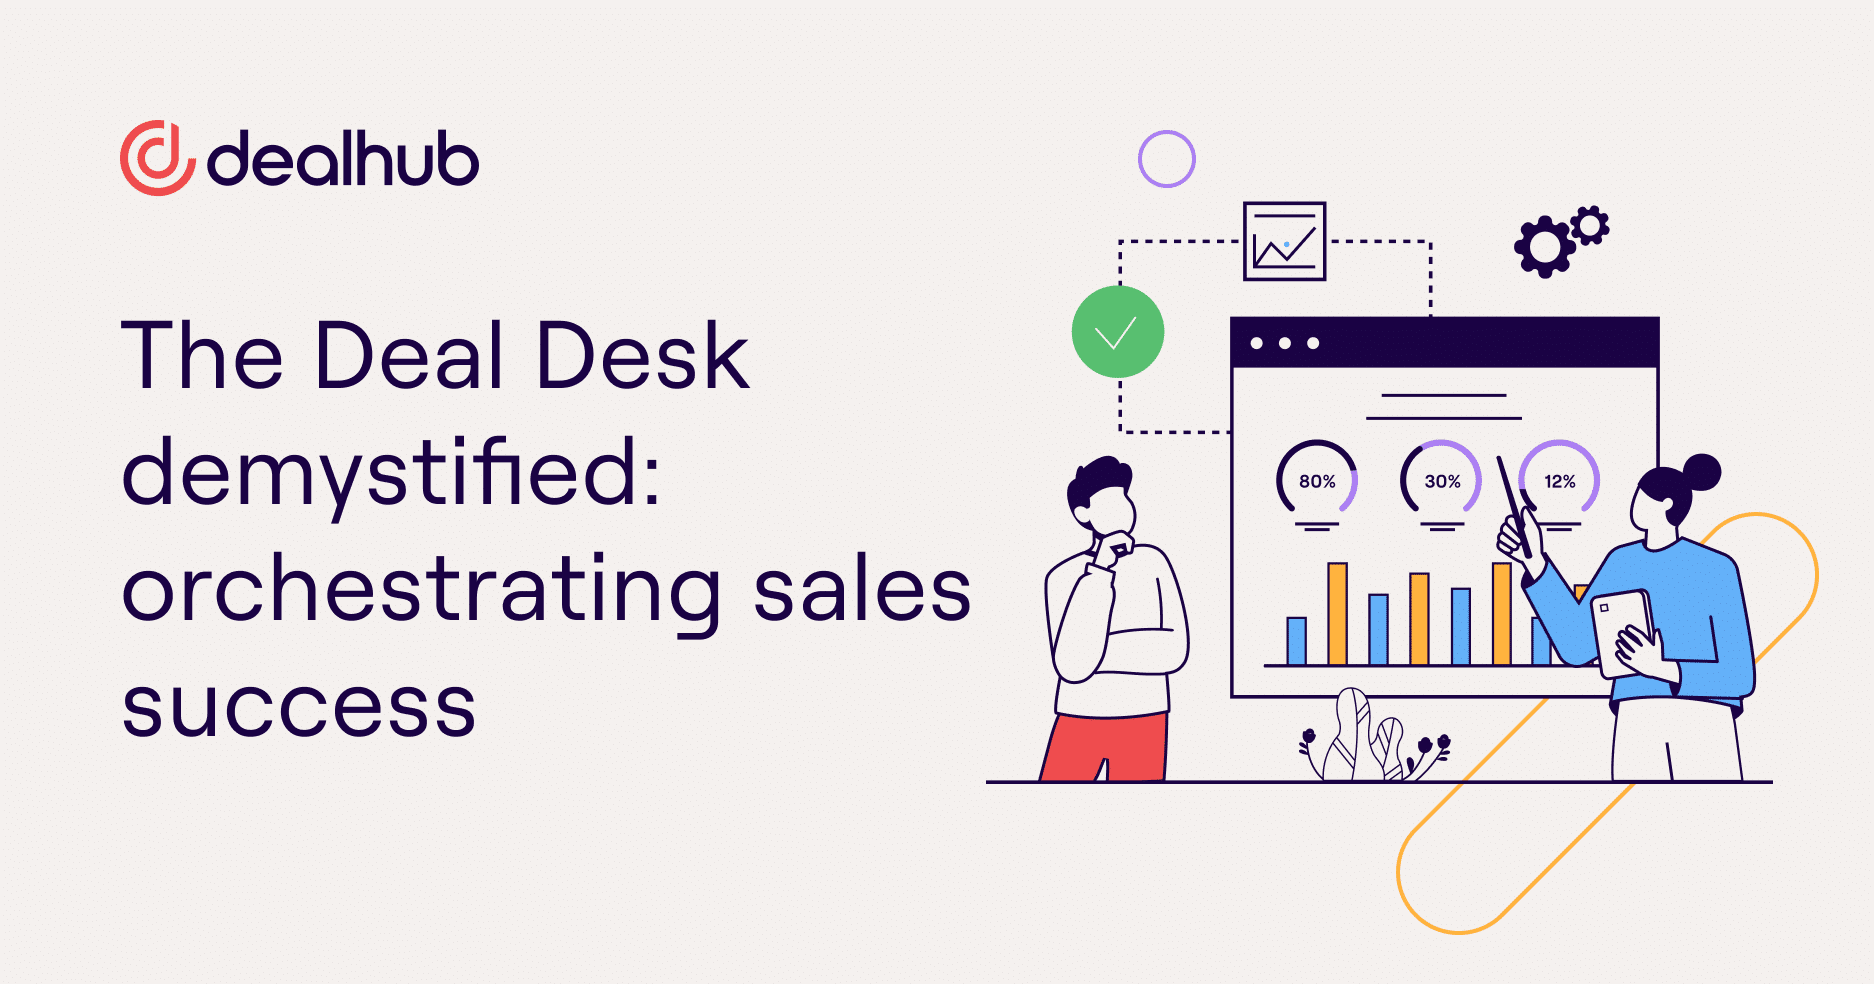 The deal desk demystified: orchestrating sales success